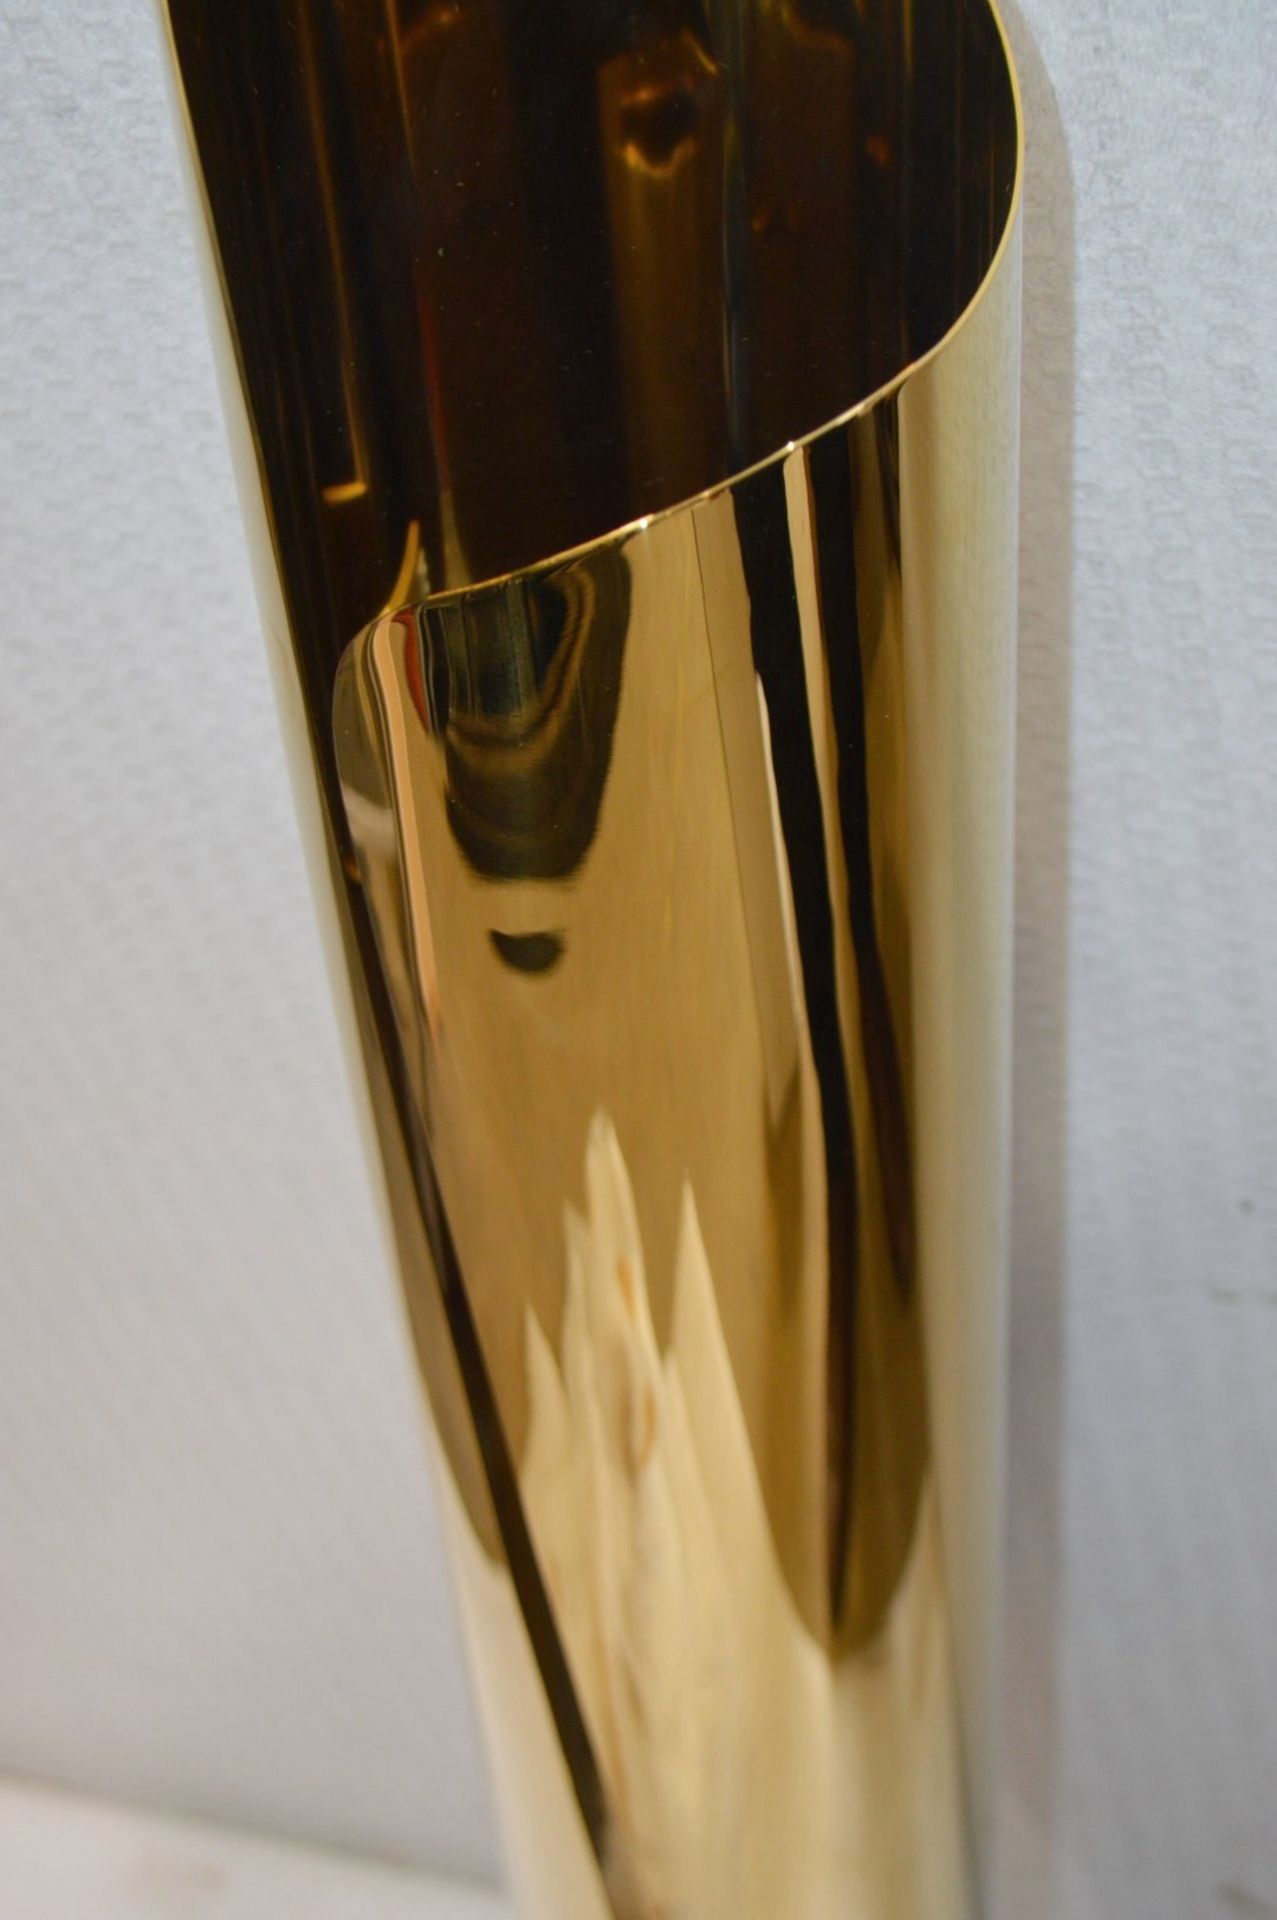 1 x 1-Metre Tall CHELSOM LED 'Curled' Wall Light / Sculptural Display Piece In A Polished Brass - Image 11 of 11